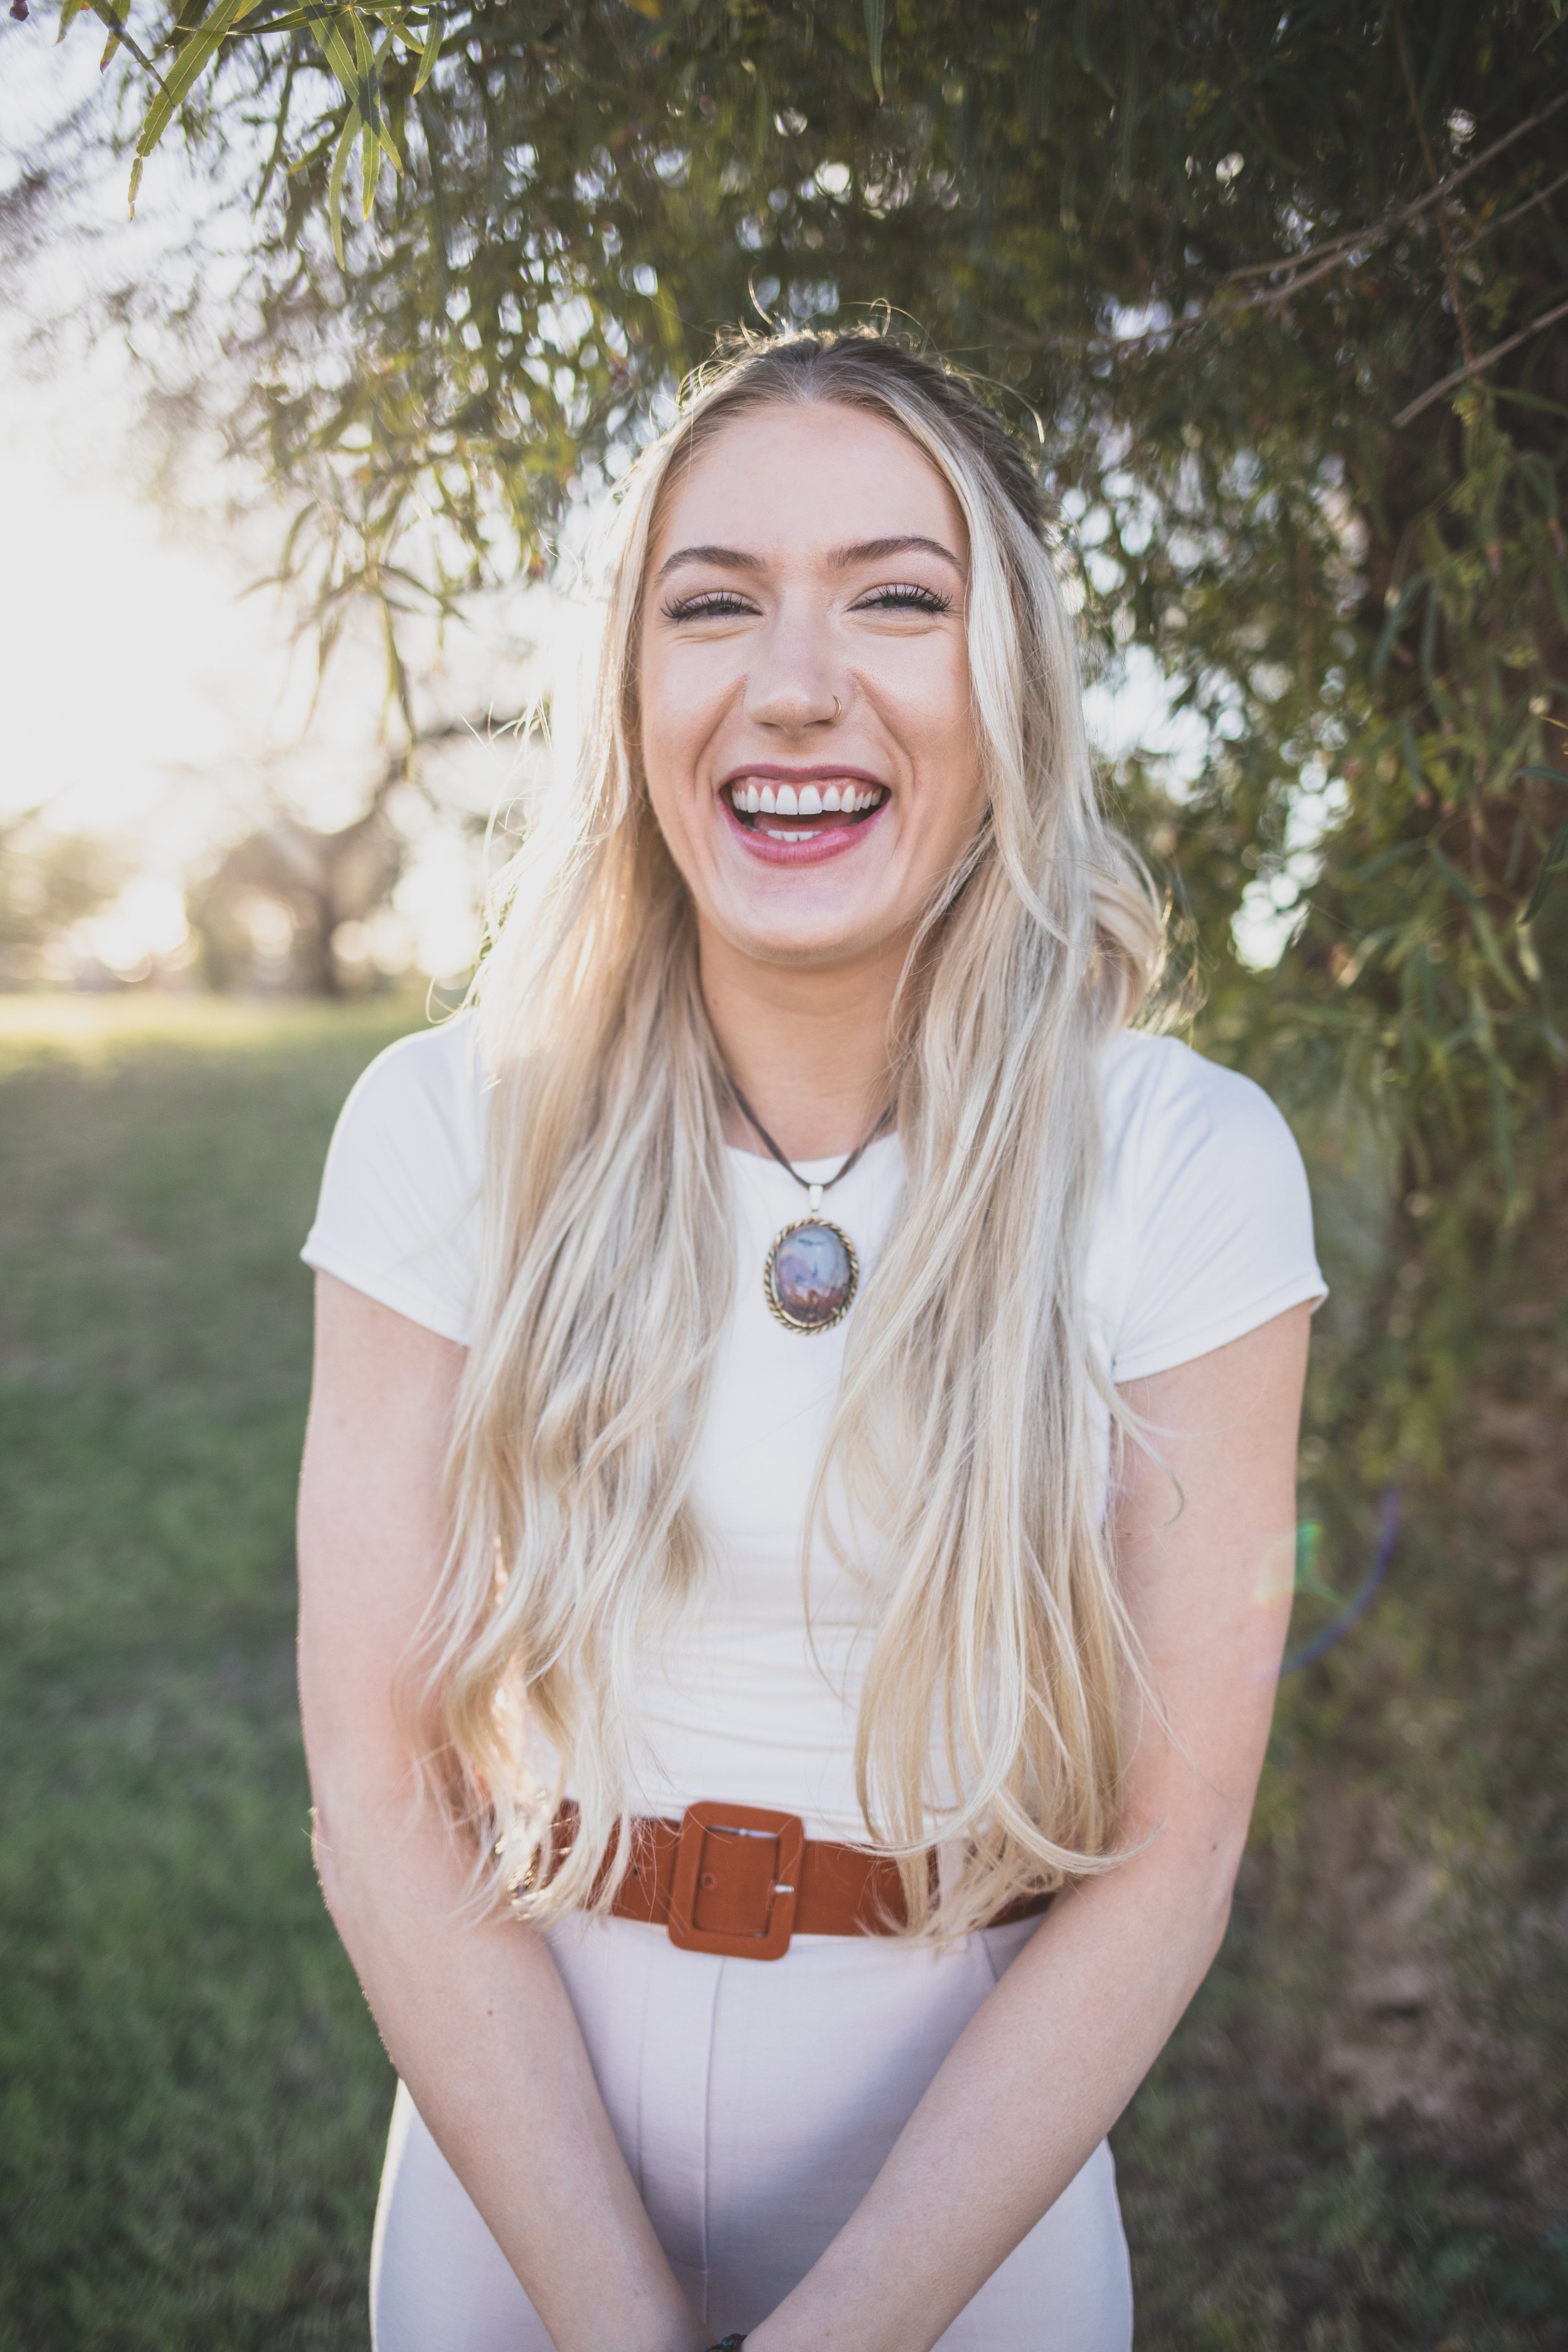 Woman laughs in front of natural backdrop for professional headshots by Scottsdale based Corporate Branding Photographer, Jennifer Lind Schutsky in Arizona.